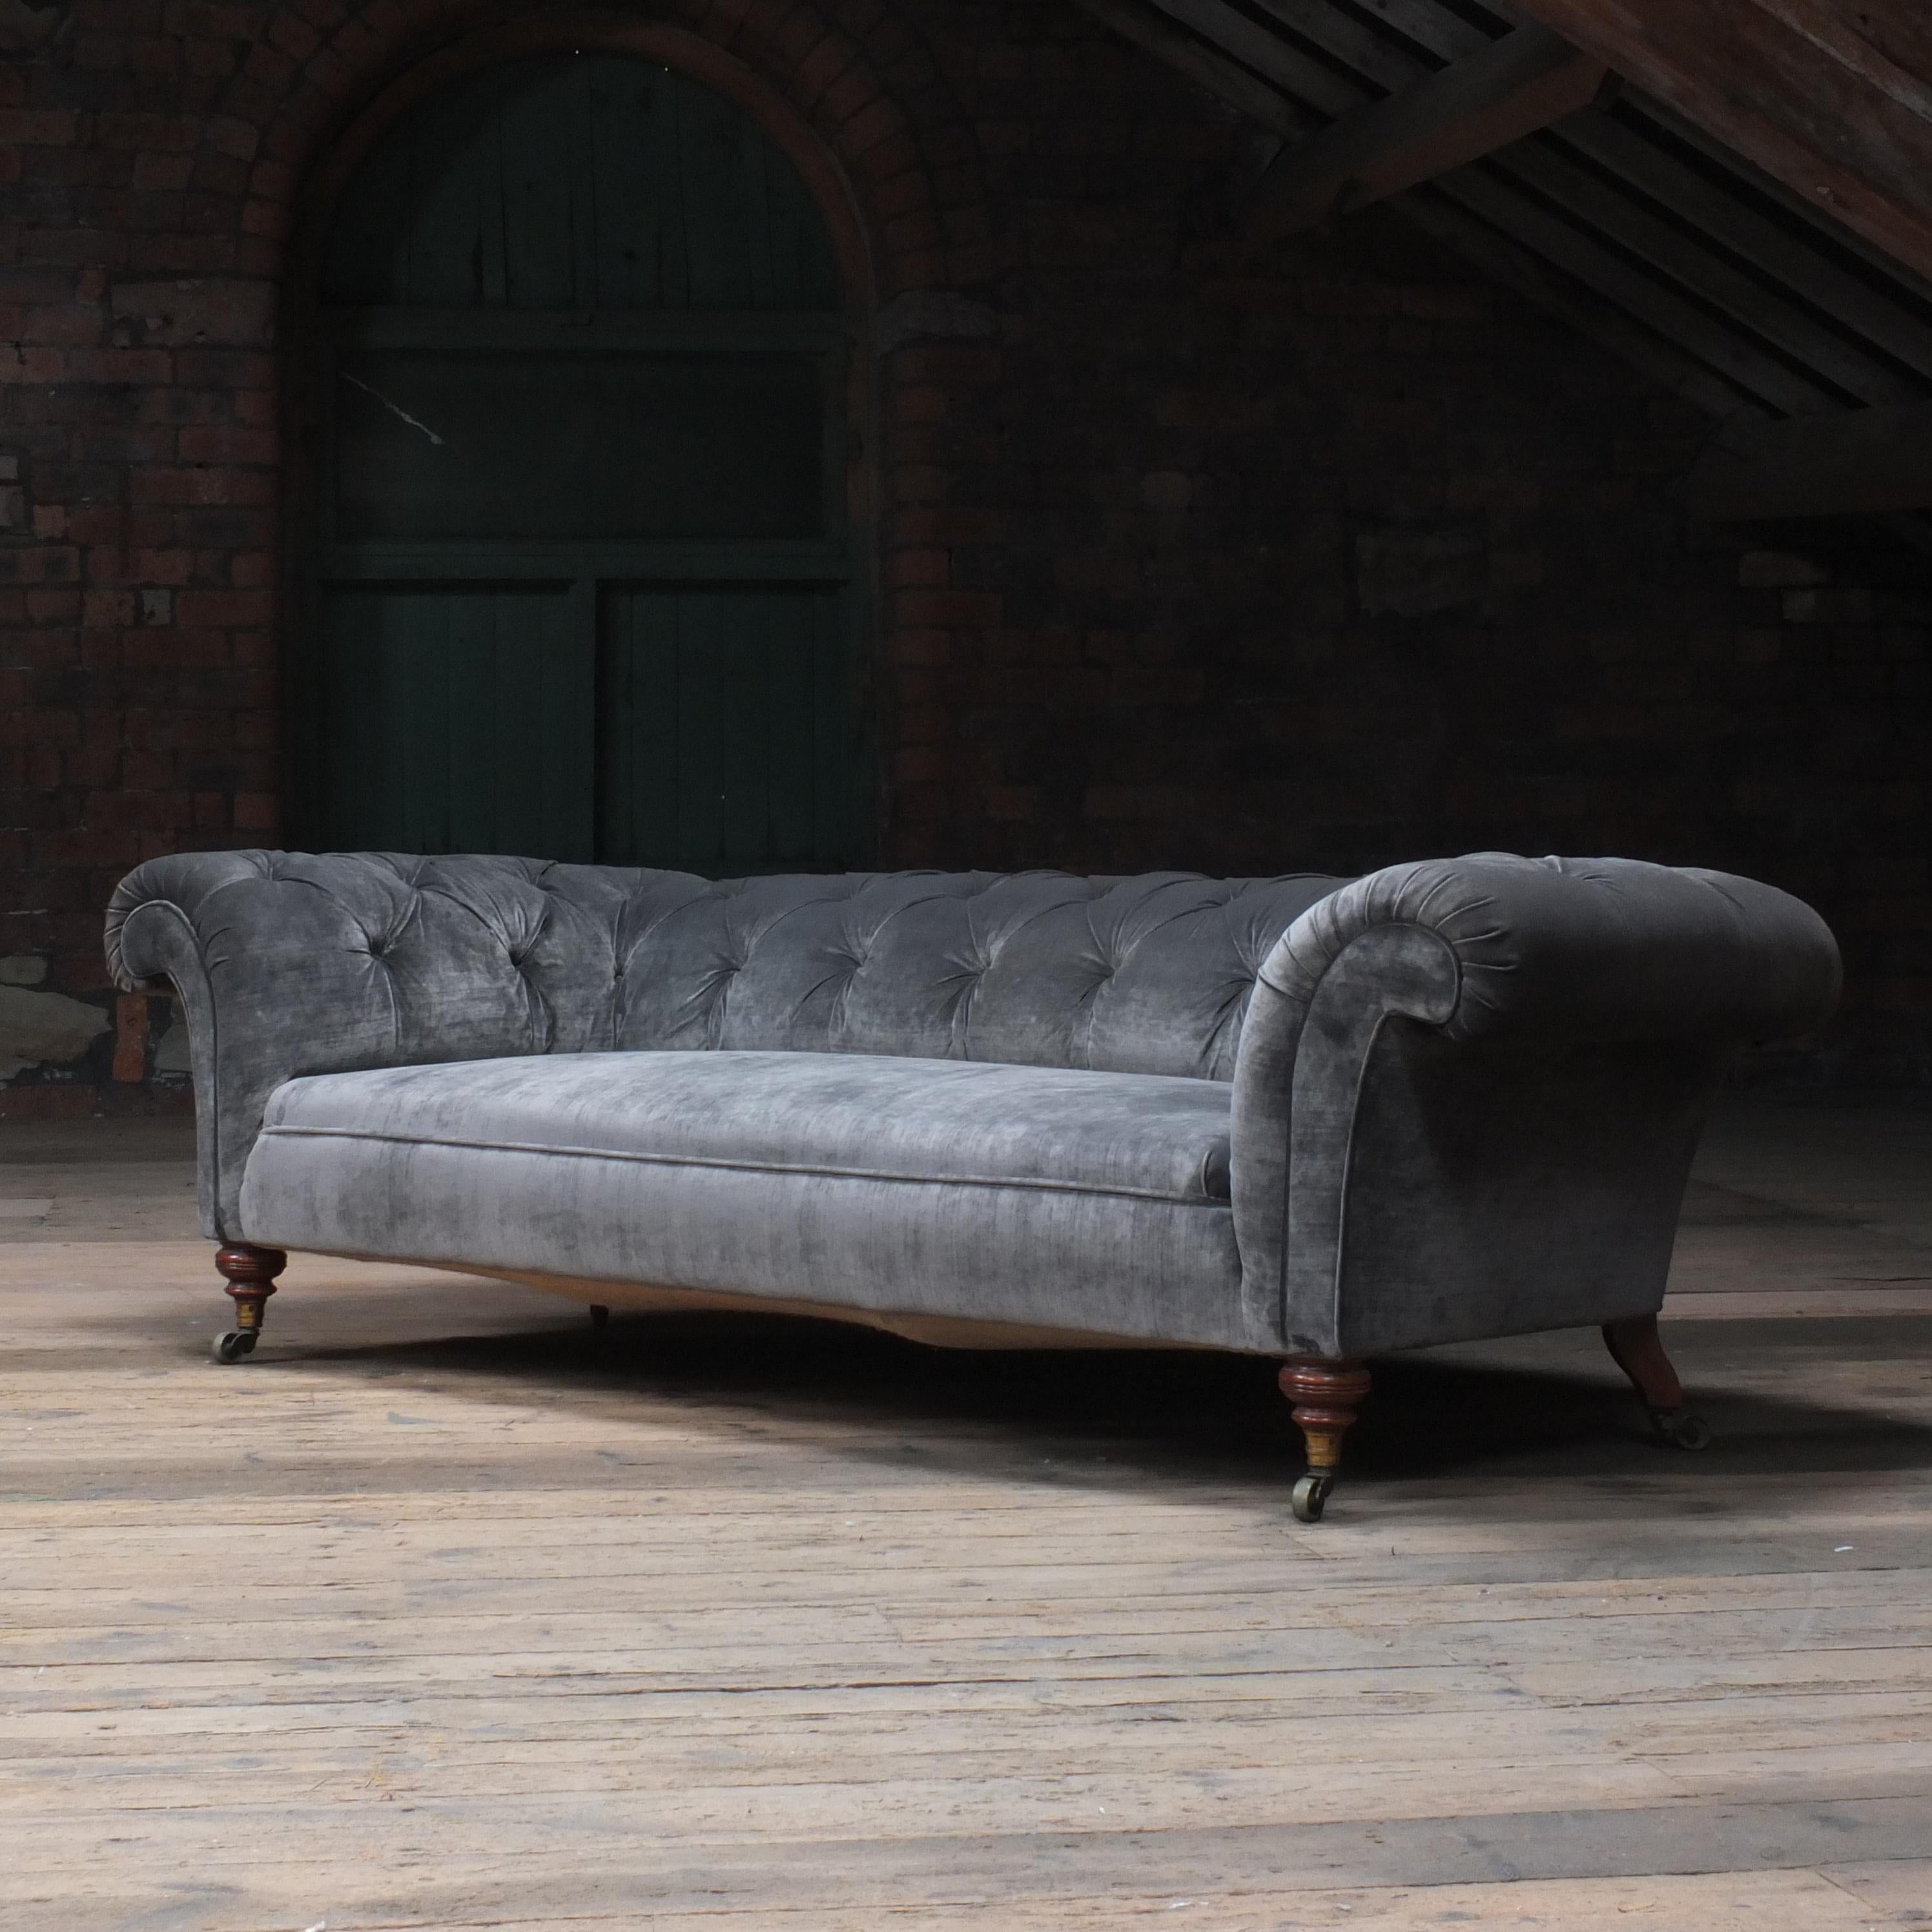 A Large country house English chesterfield sofa by Howard & sons - London. Raised on Howard's uniquely ring turned walnut legs to the front and out swept to the back, all on Howard & son's stamped castors. The low sleek design of Howard